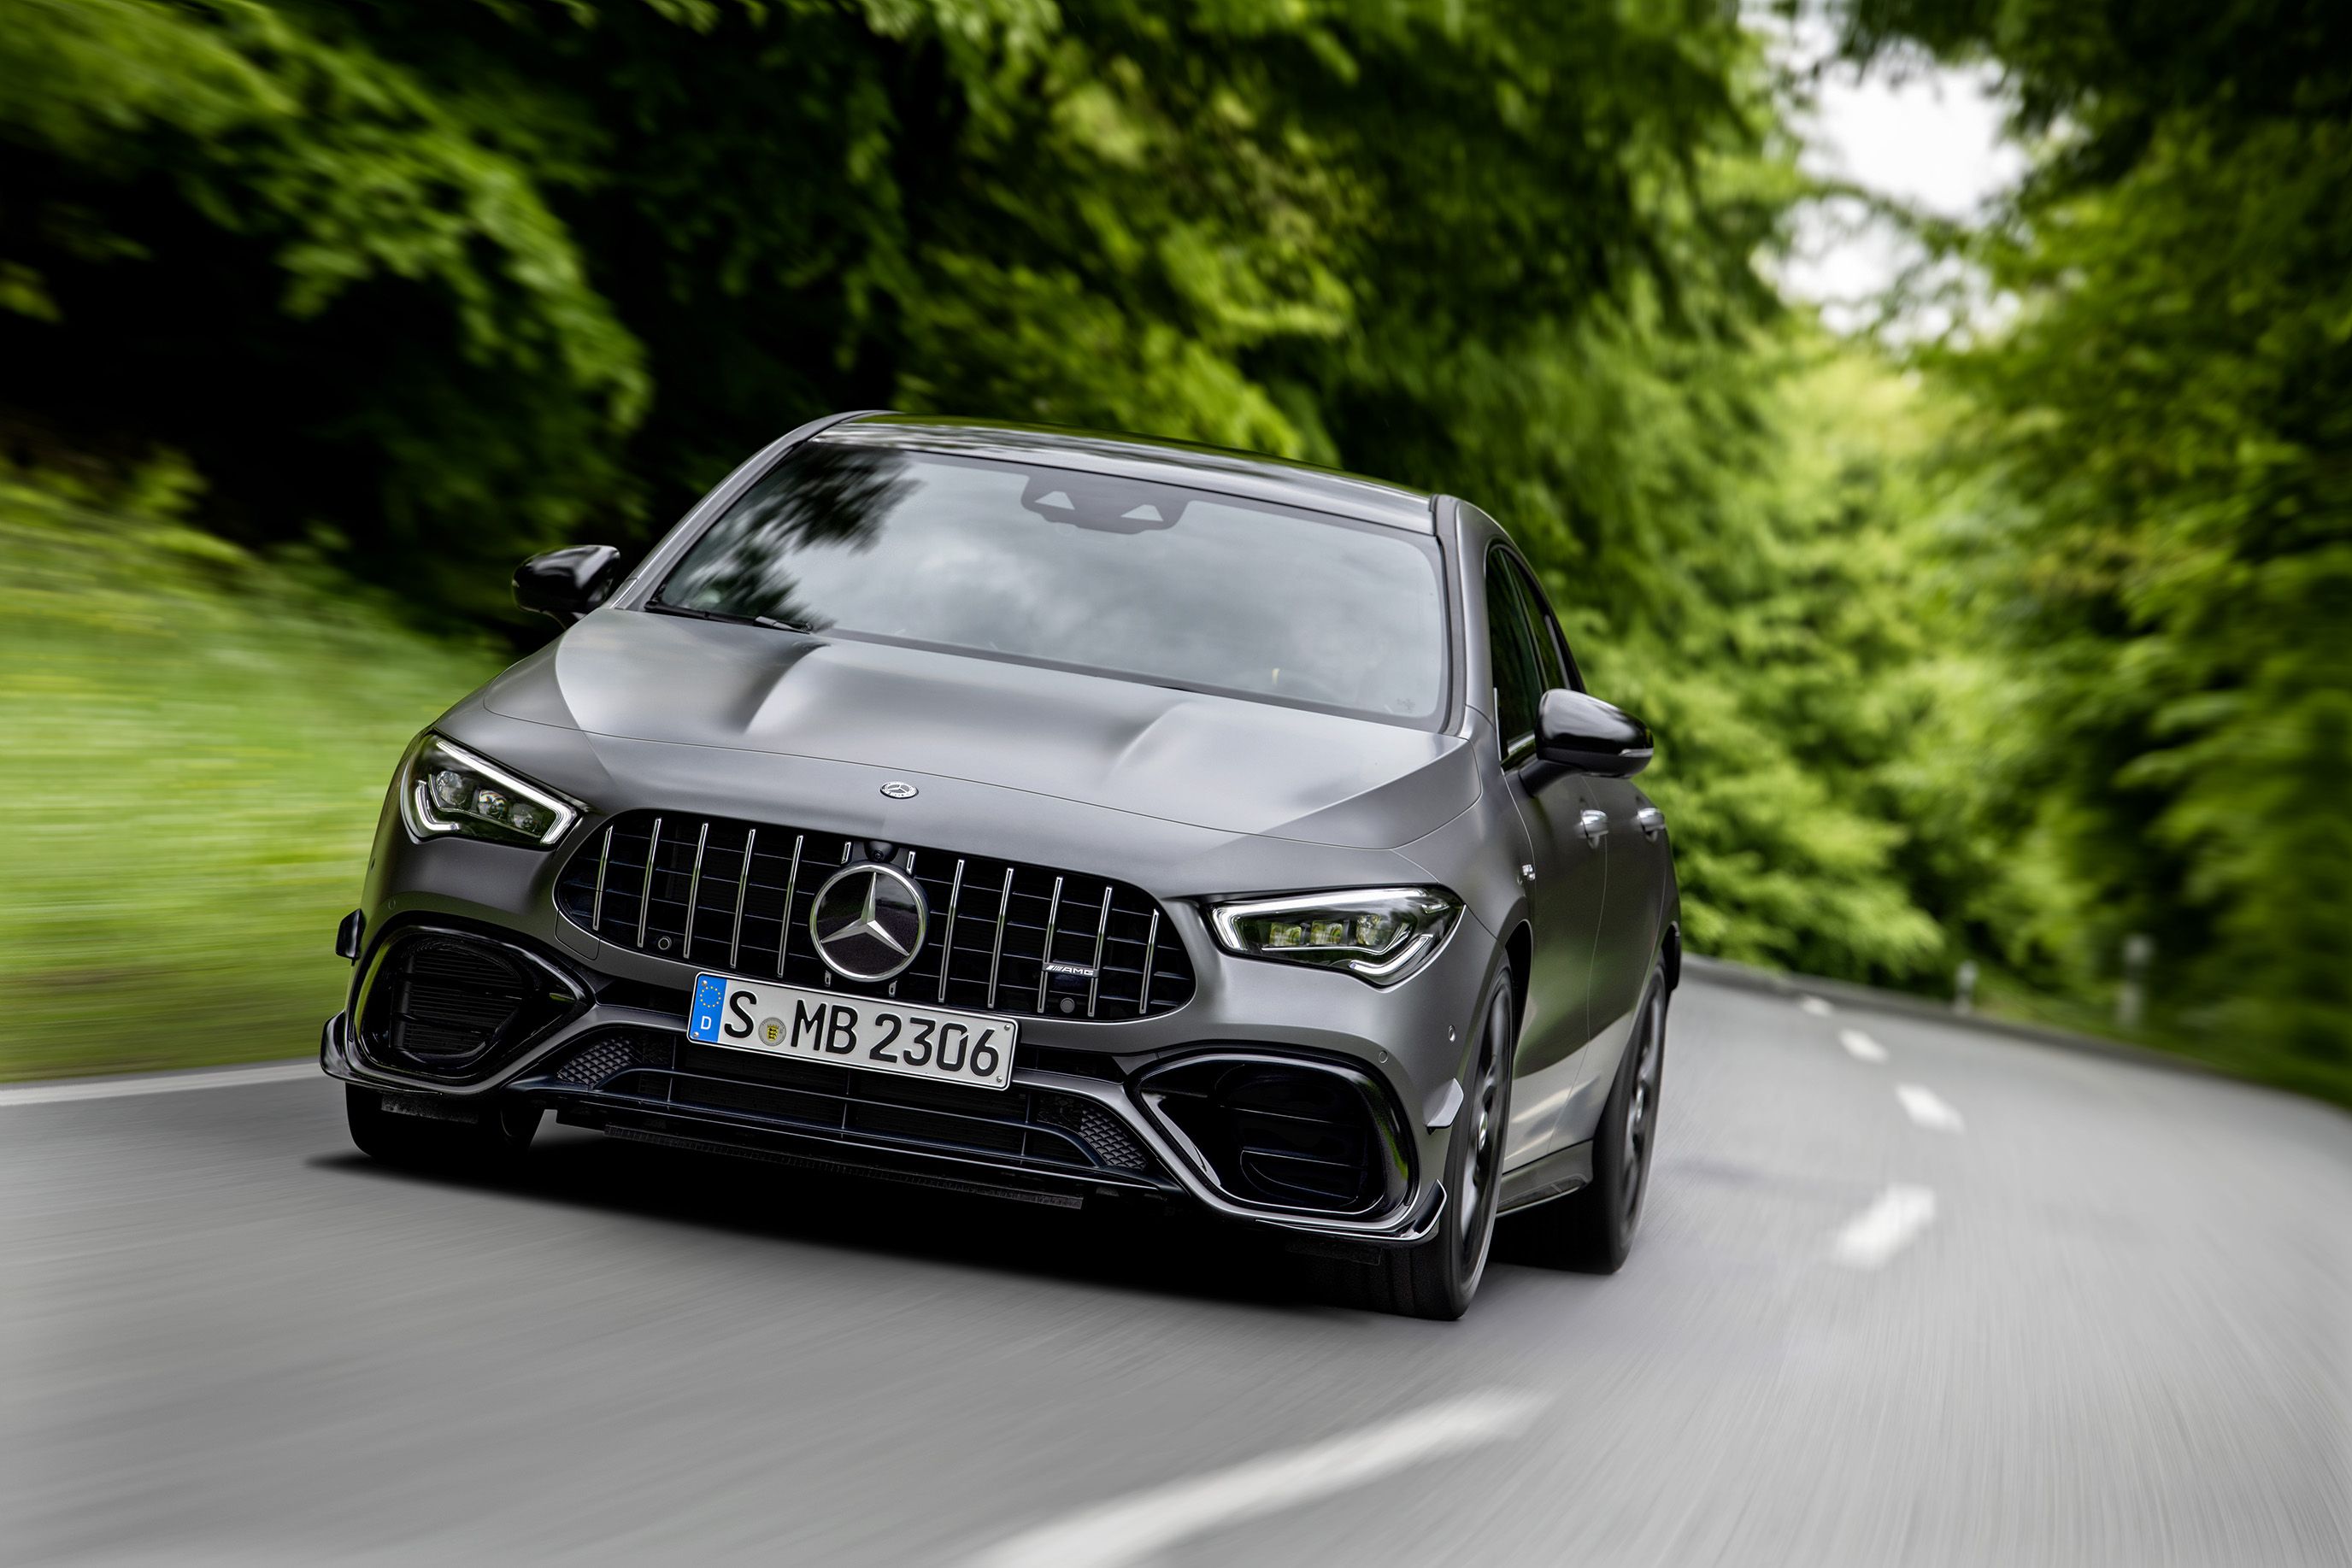 Cla 45 S Amg 0 100 2020 Mercedes-AMG CLA 45 Revealed With Pictures, HP, and Specs